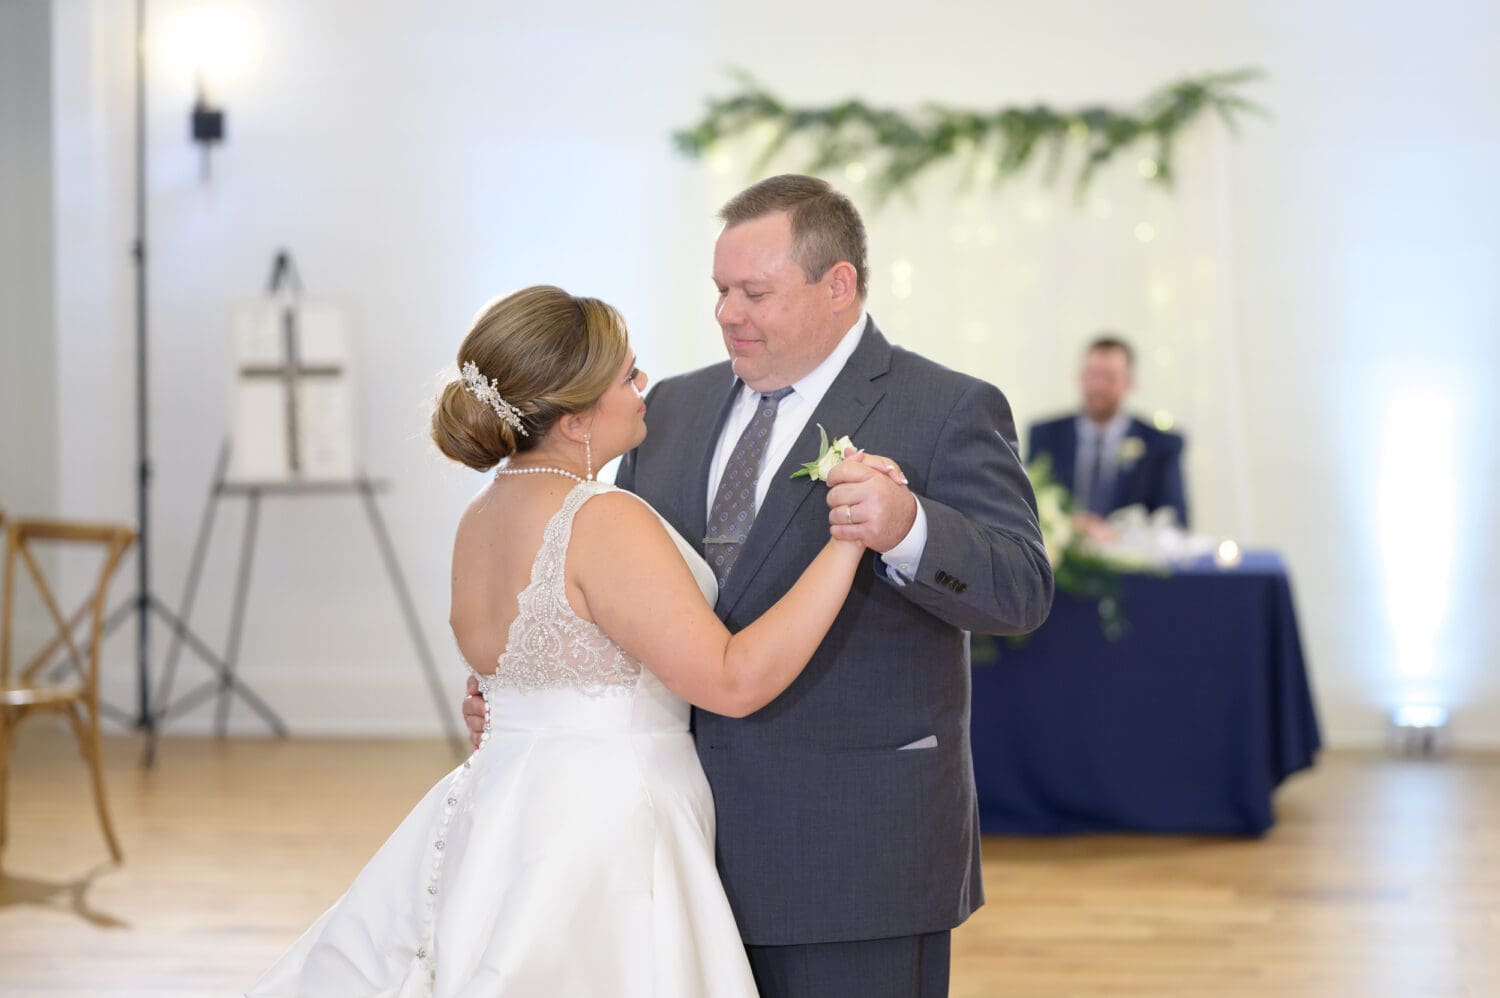 Father and daughter dance - The Venue at White Oaks Farm